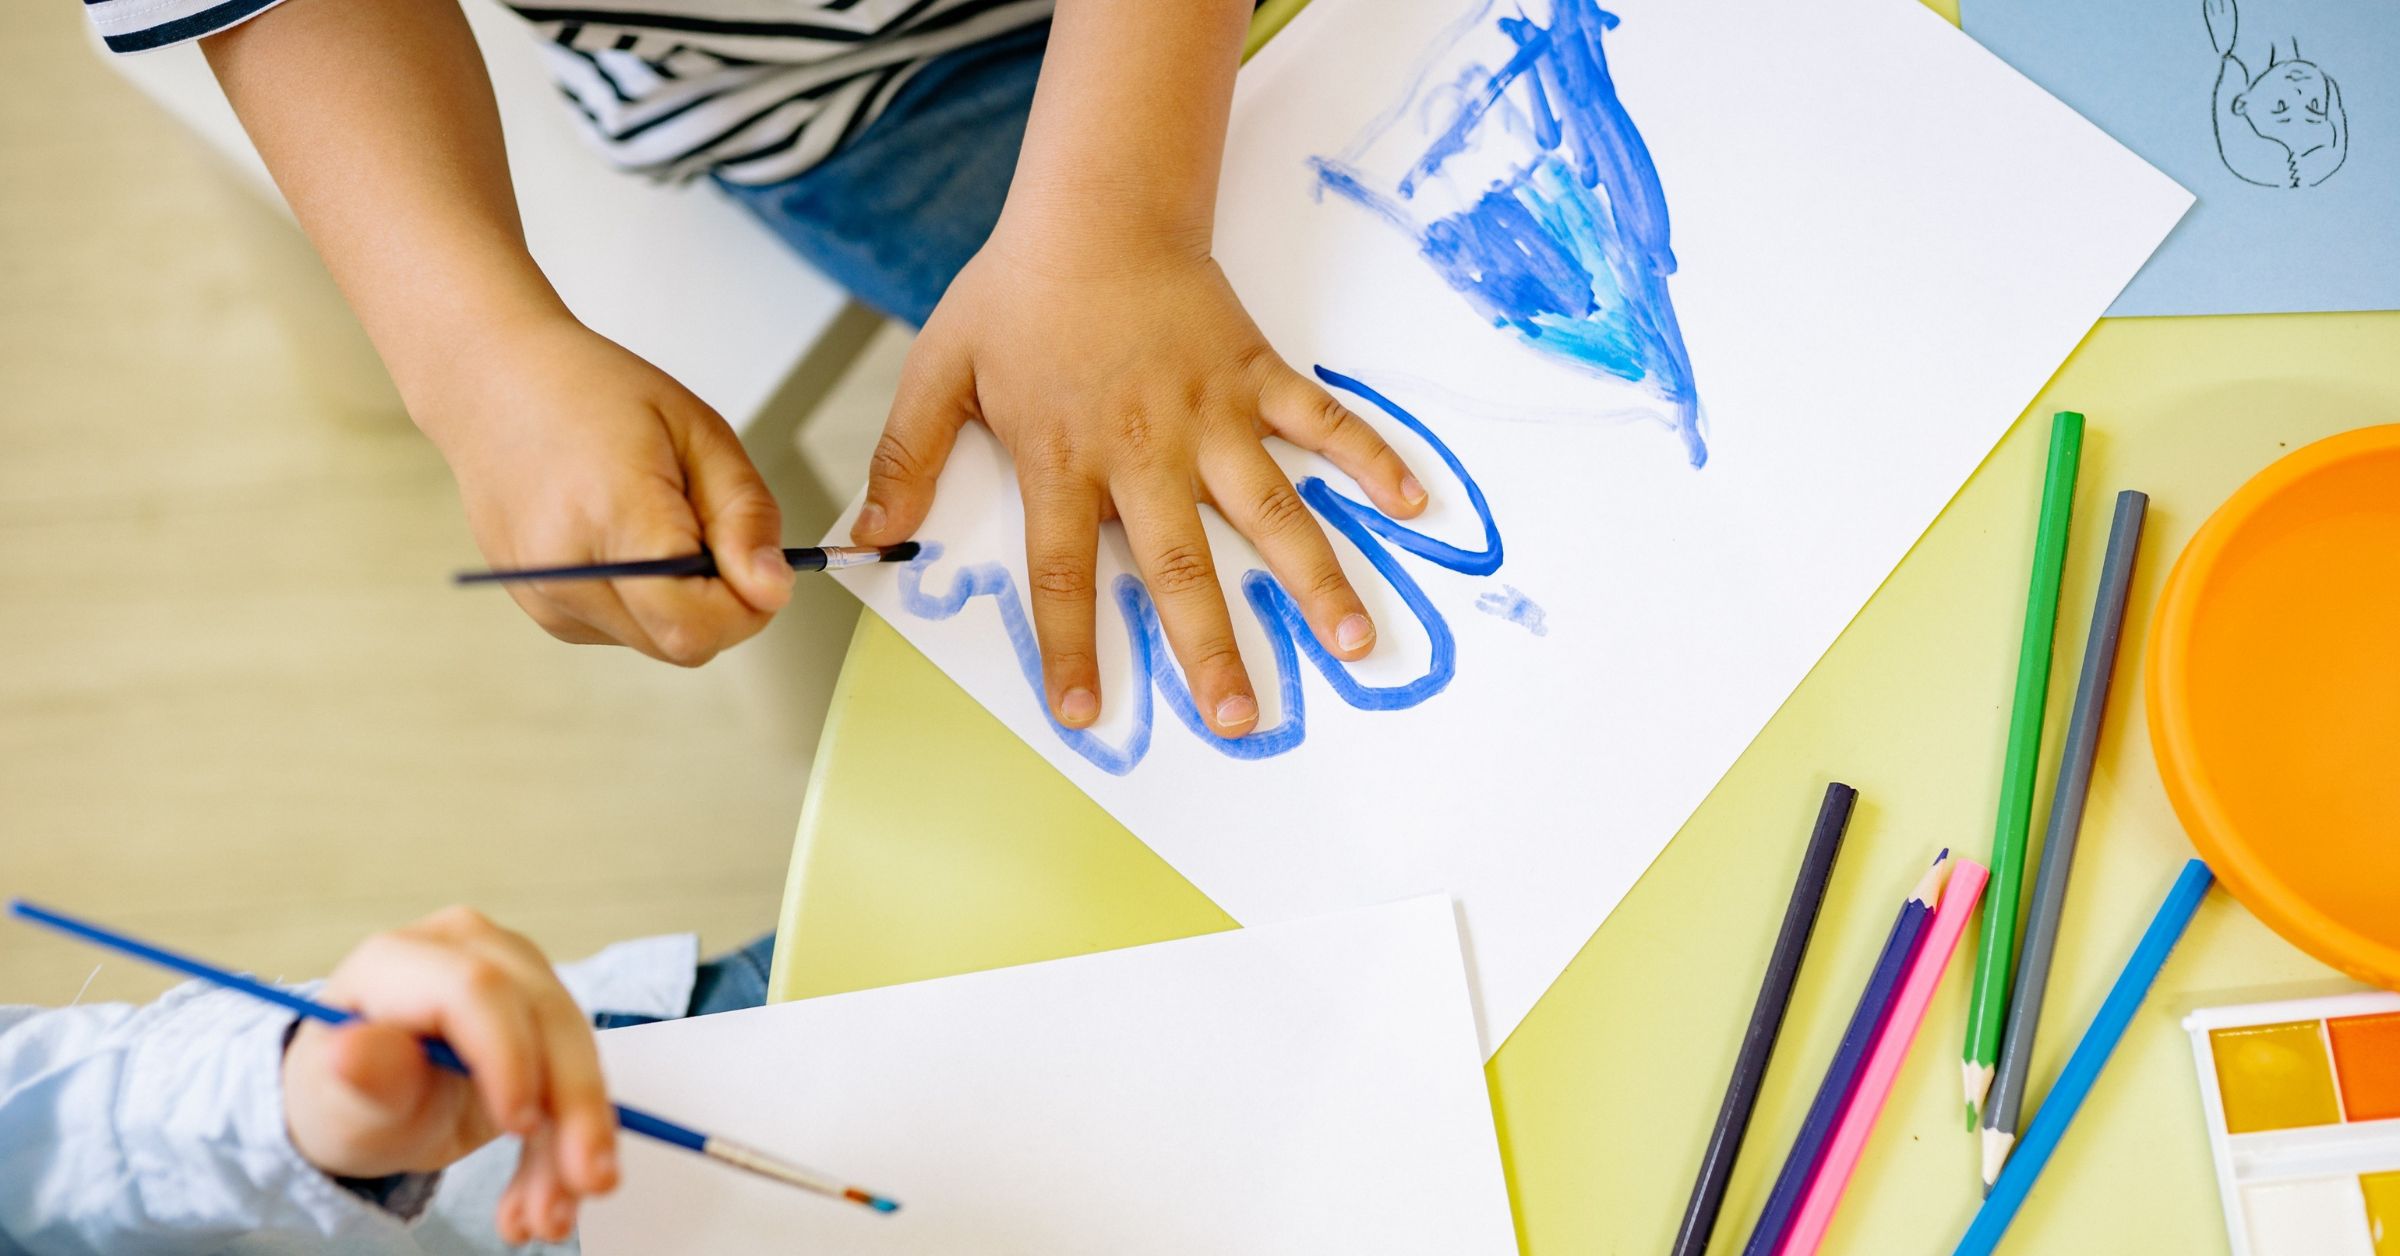 A photograph shows a young child using a paintbrush and blue paint to draw an outline around their left hand.